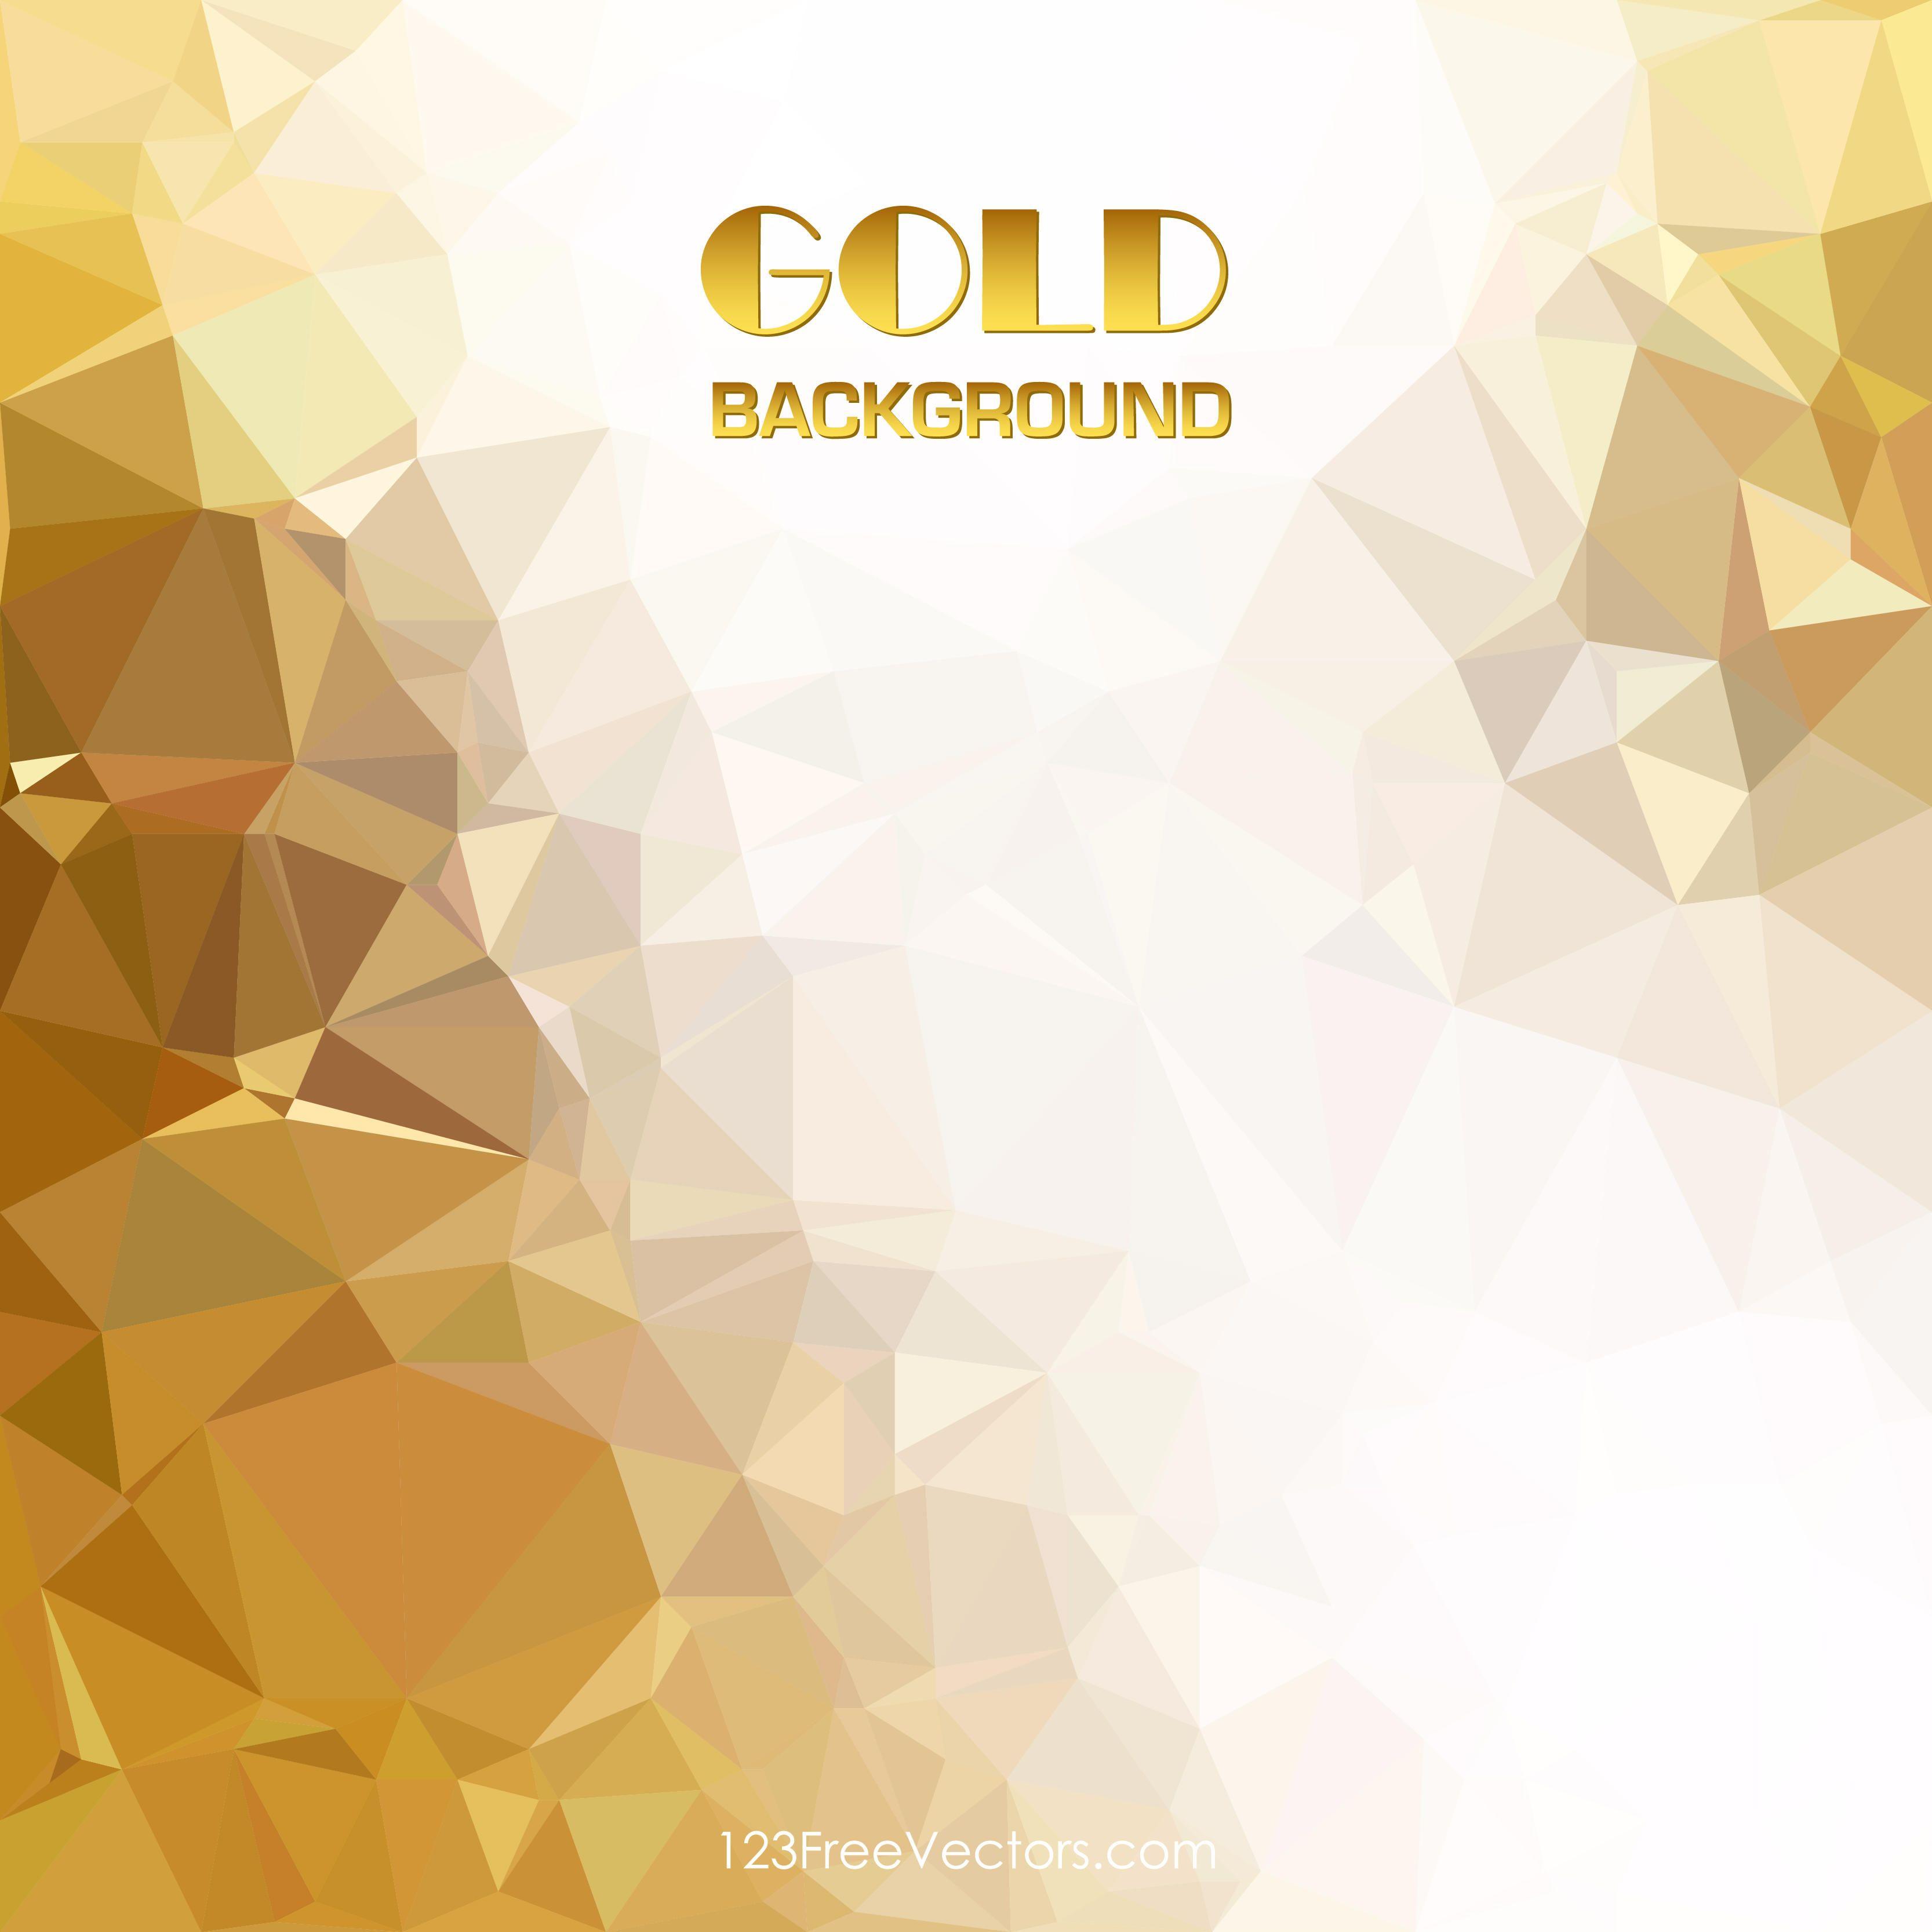 Low Poly Light Golden BackgroundFreevectors